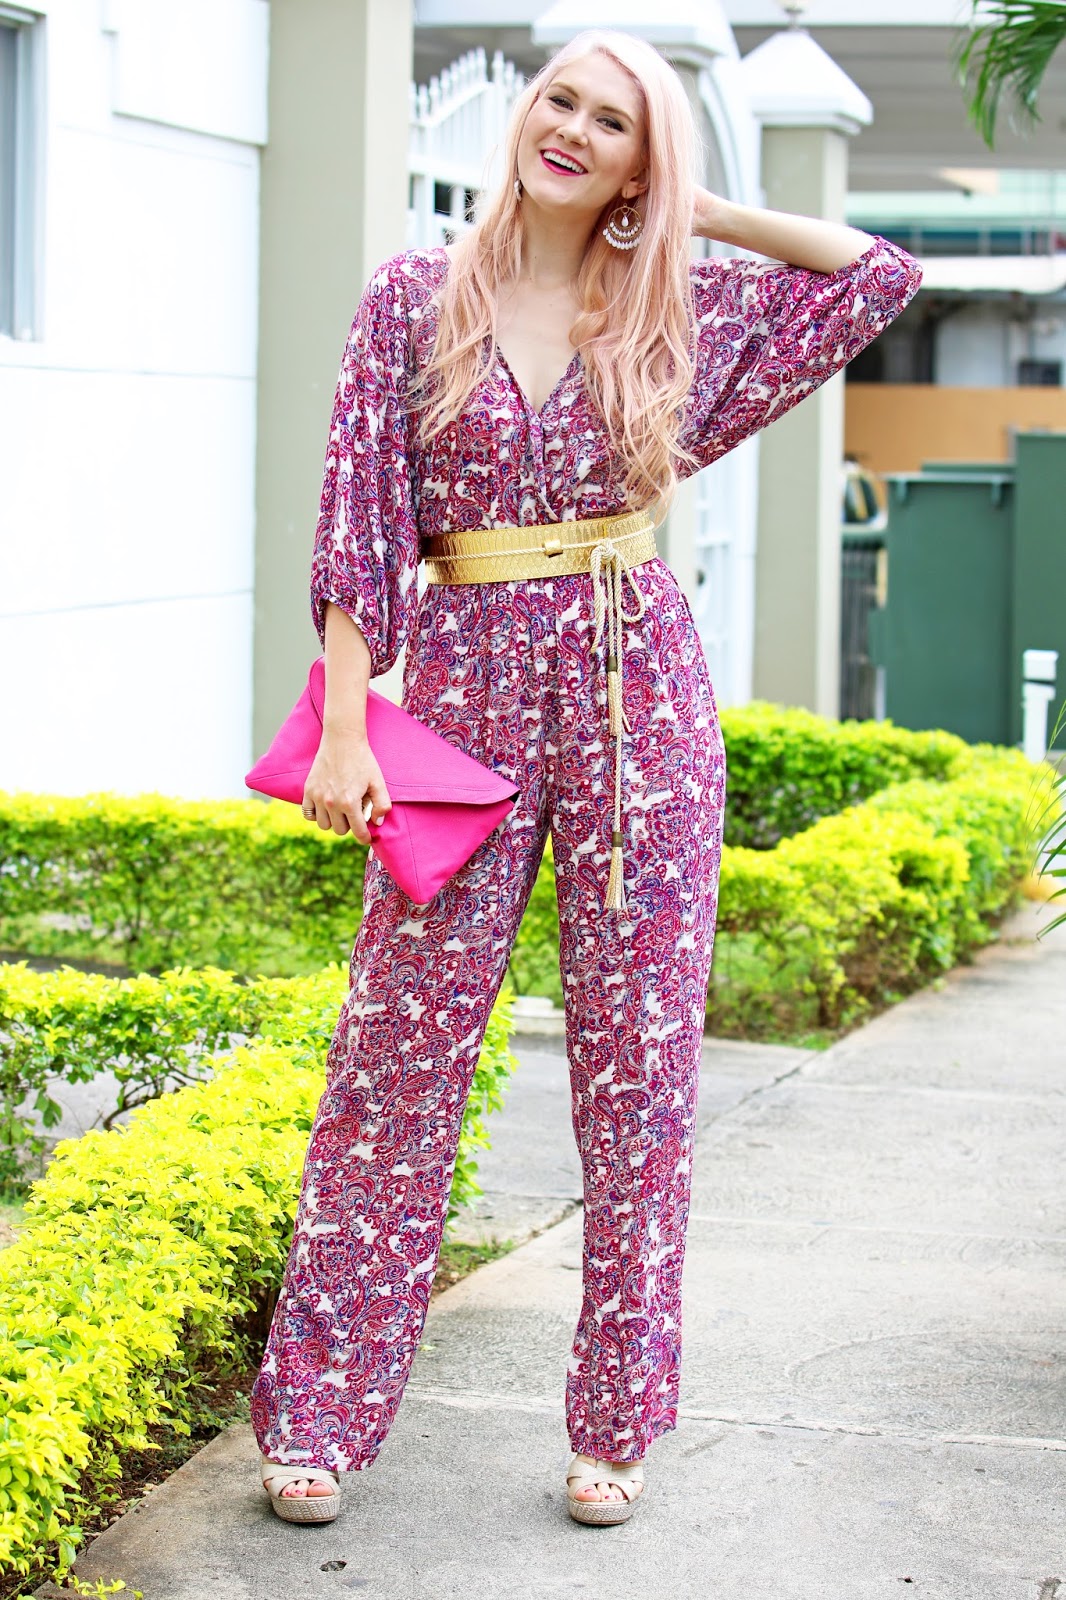 Pretty jumpsuit outfit for Spring or Summer